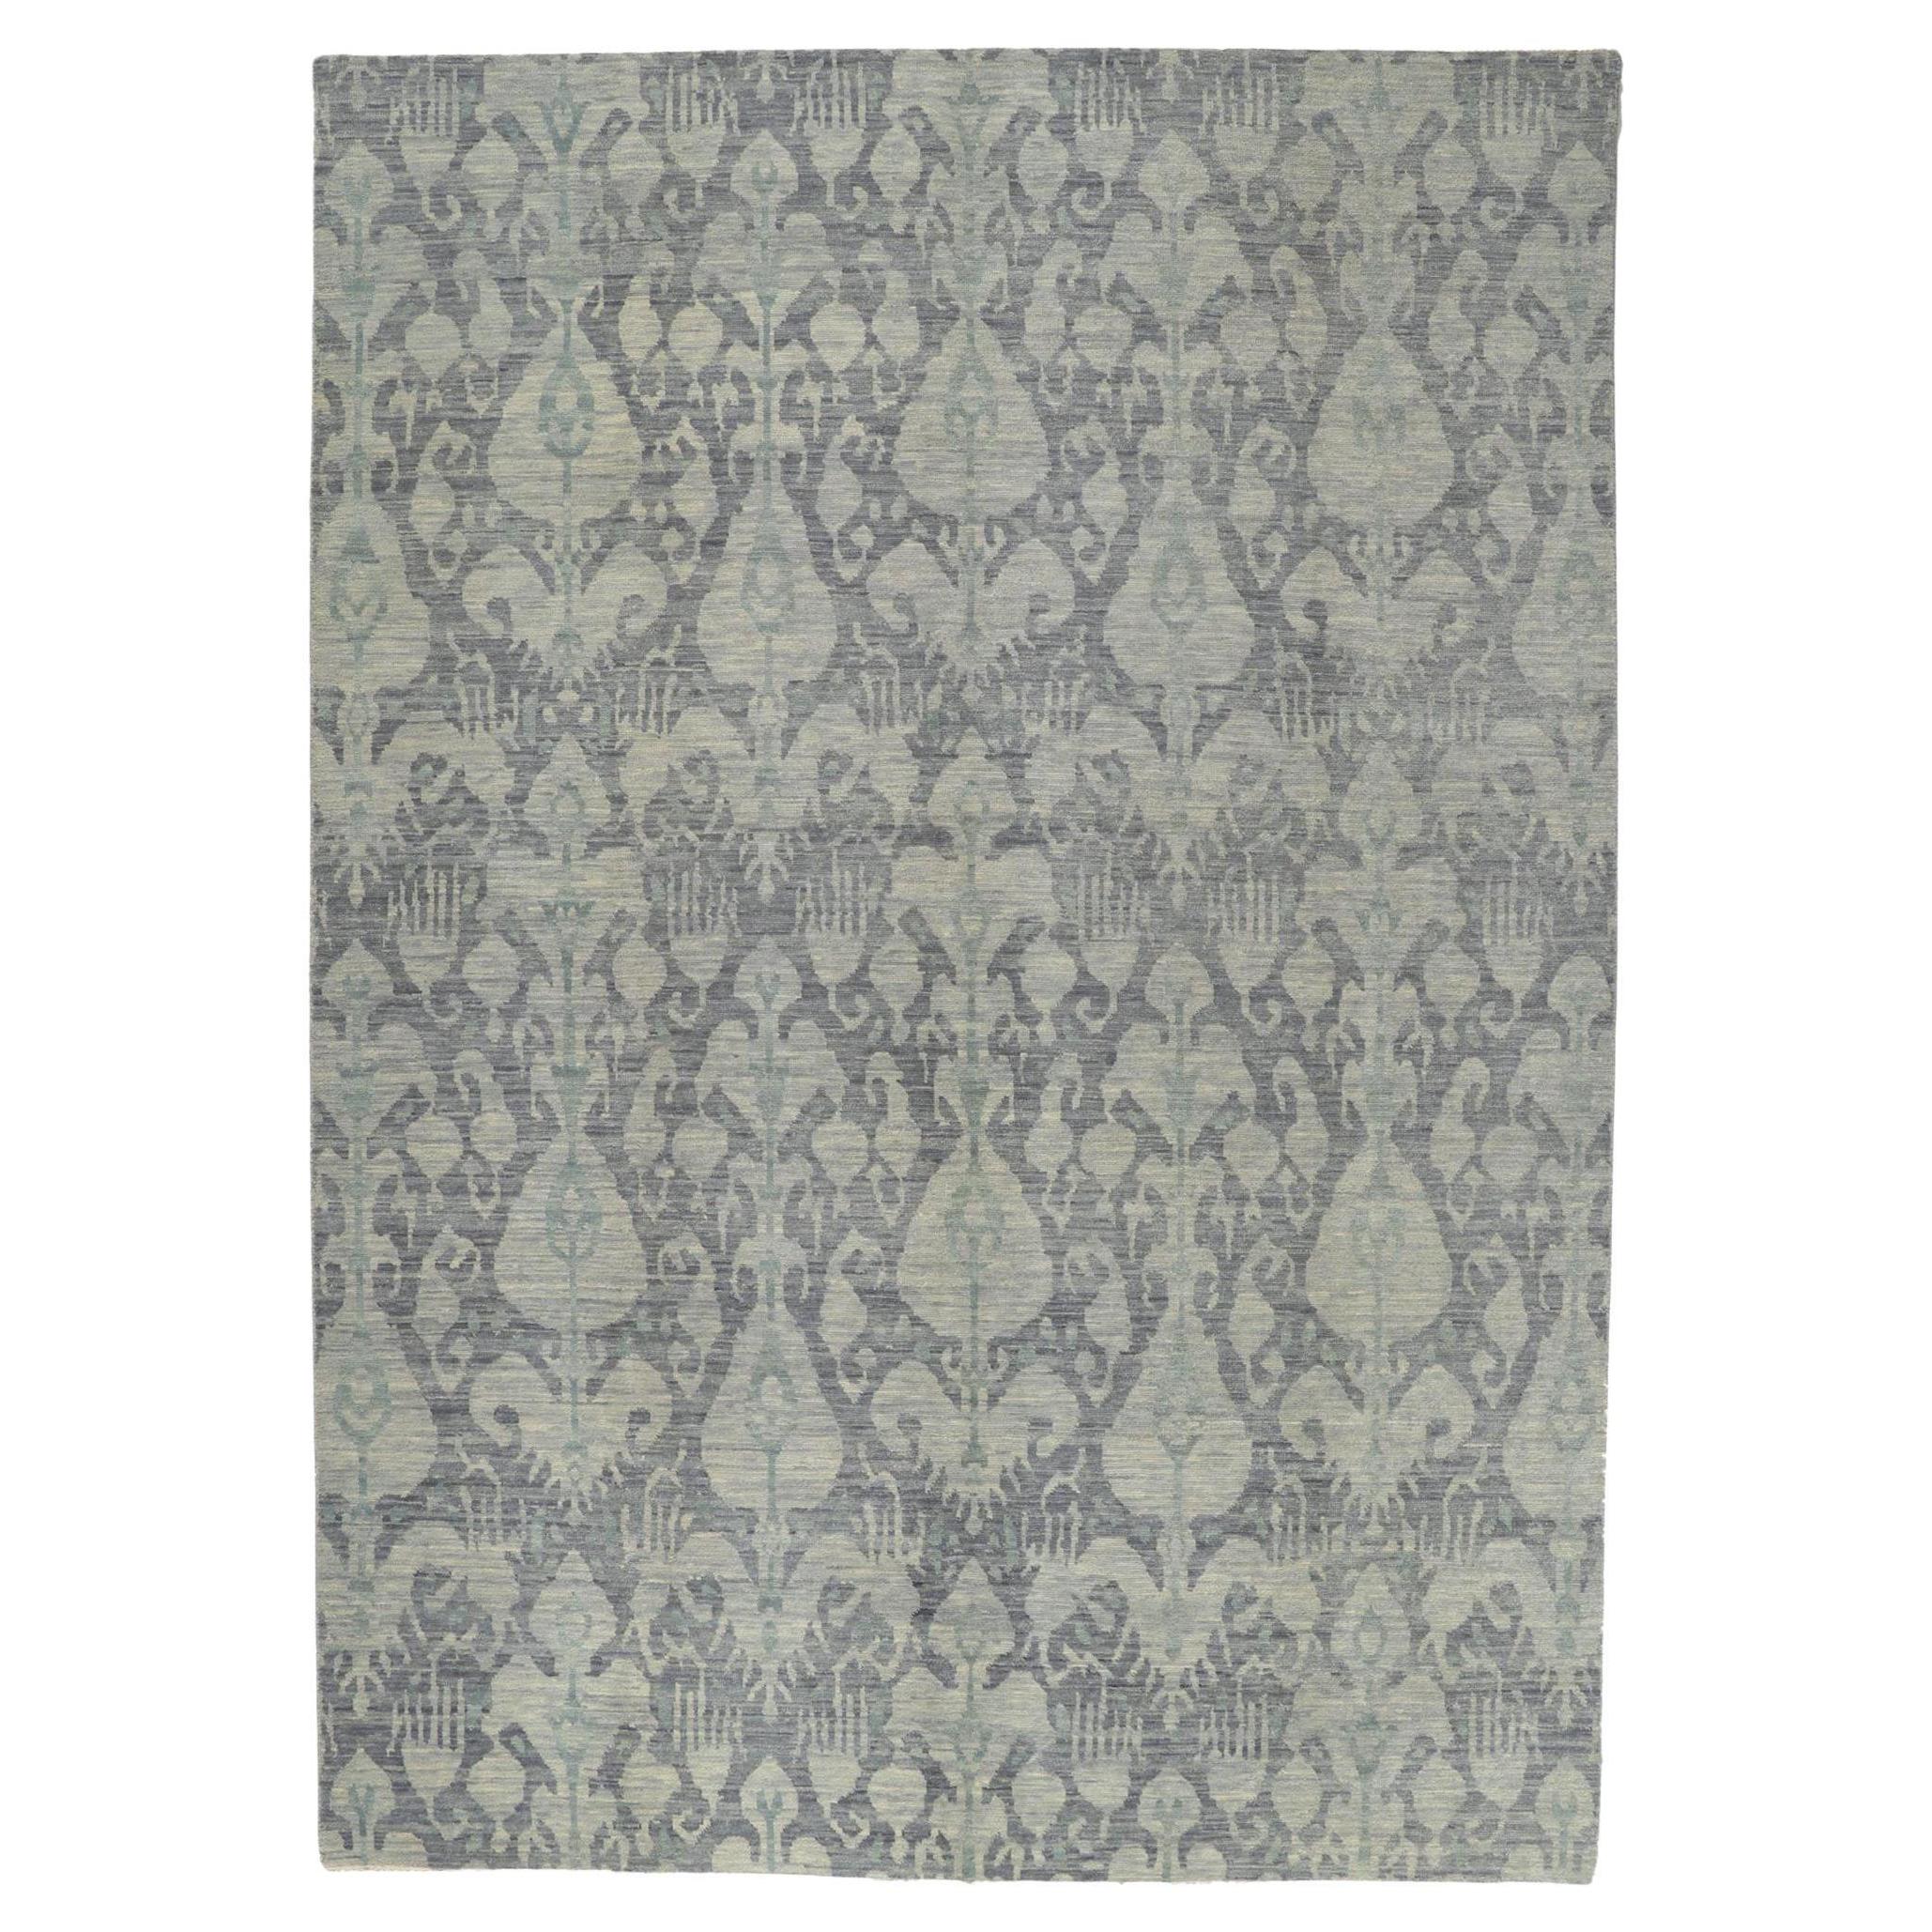 New Transitional Ikat Rug with Gray and Blue Earth-Tone Colors For Sale